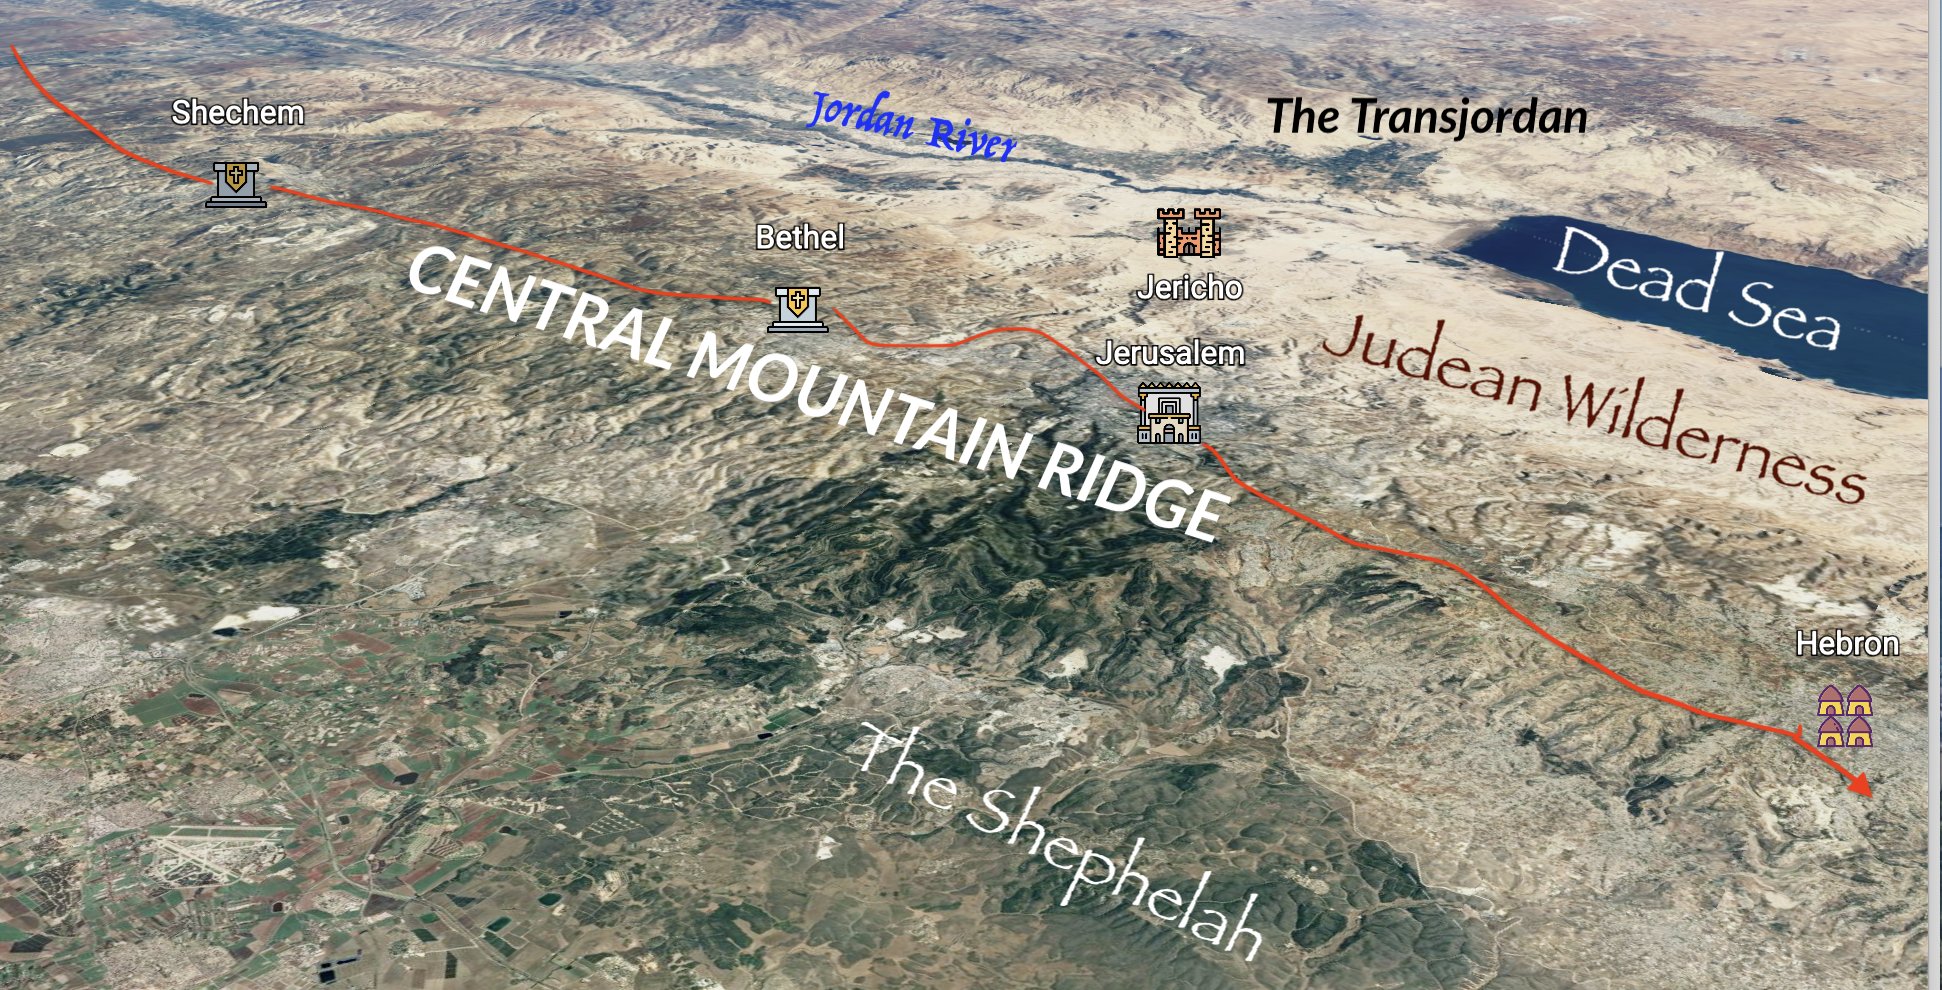 Bethel sat astride the Central Mountain Ridge with Shechem to the north, and Jerusalem to the south. Shechem was a major Bronze Age city in Canaan.